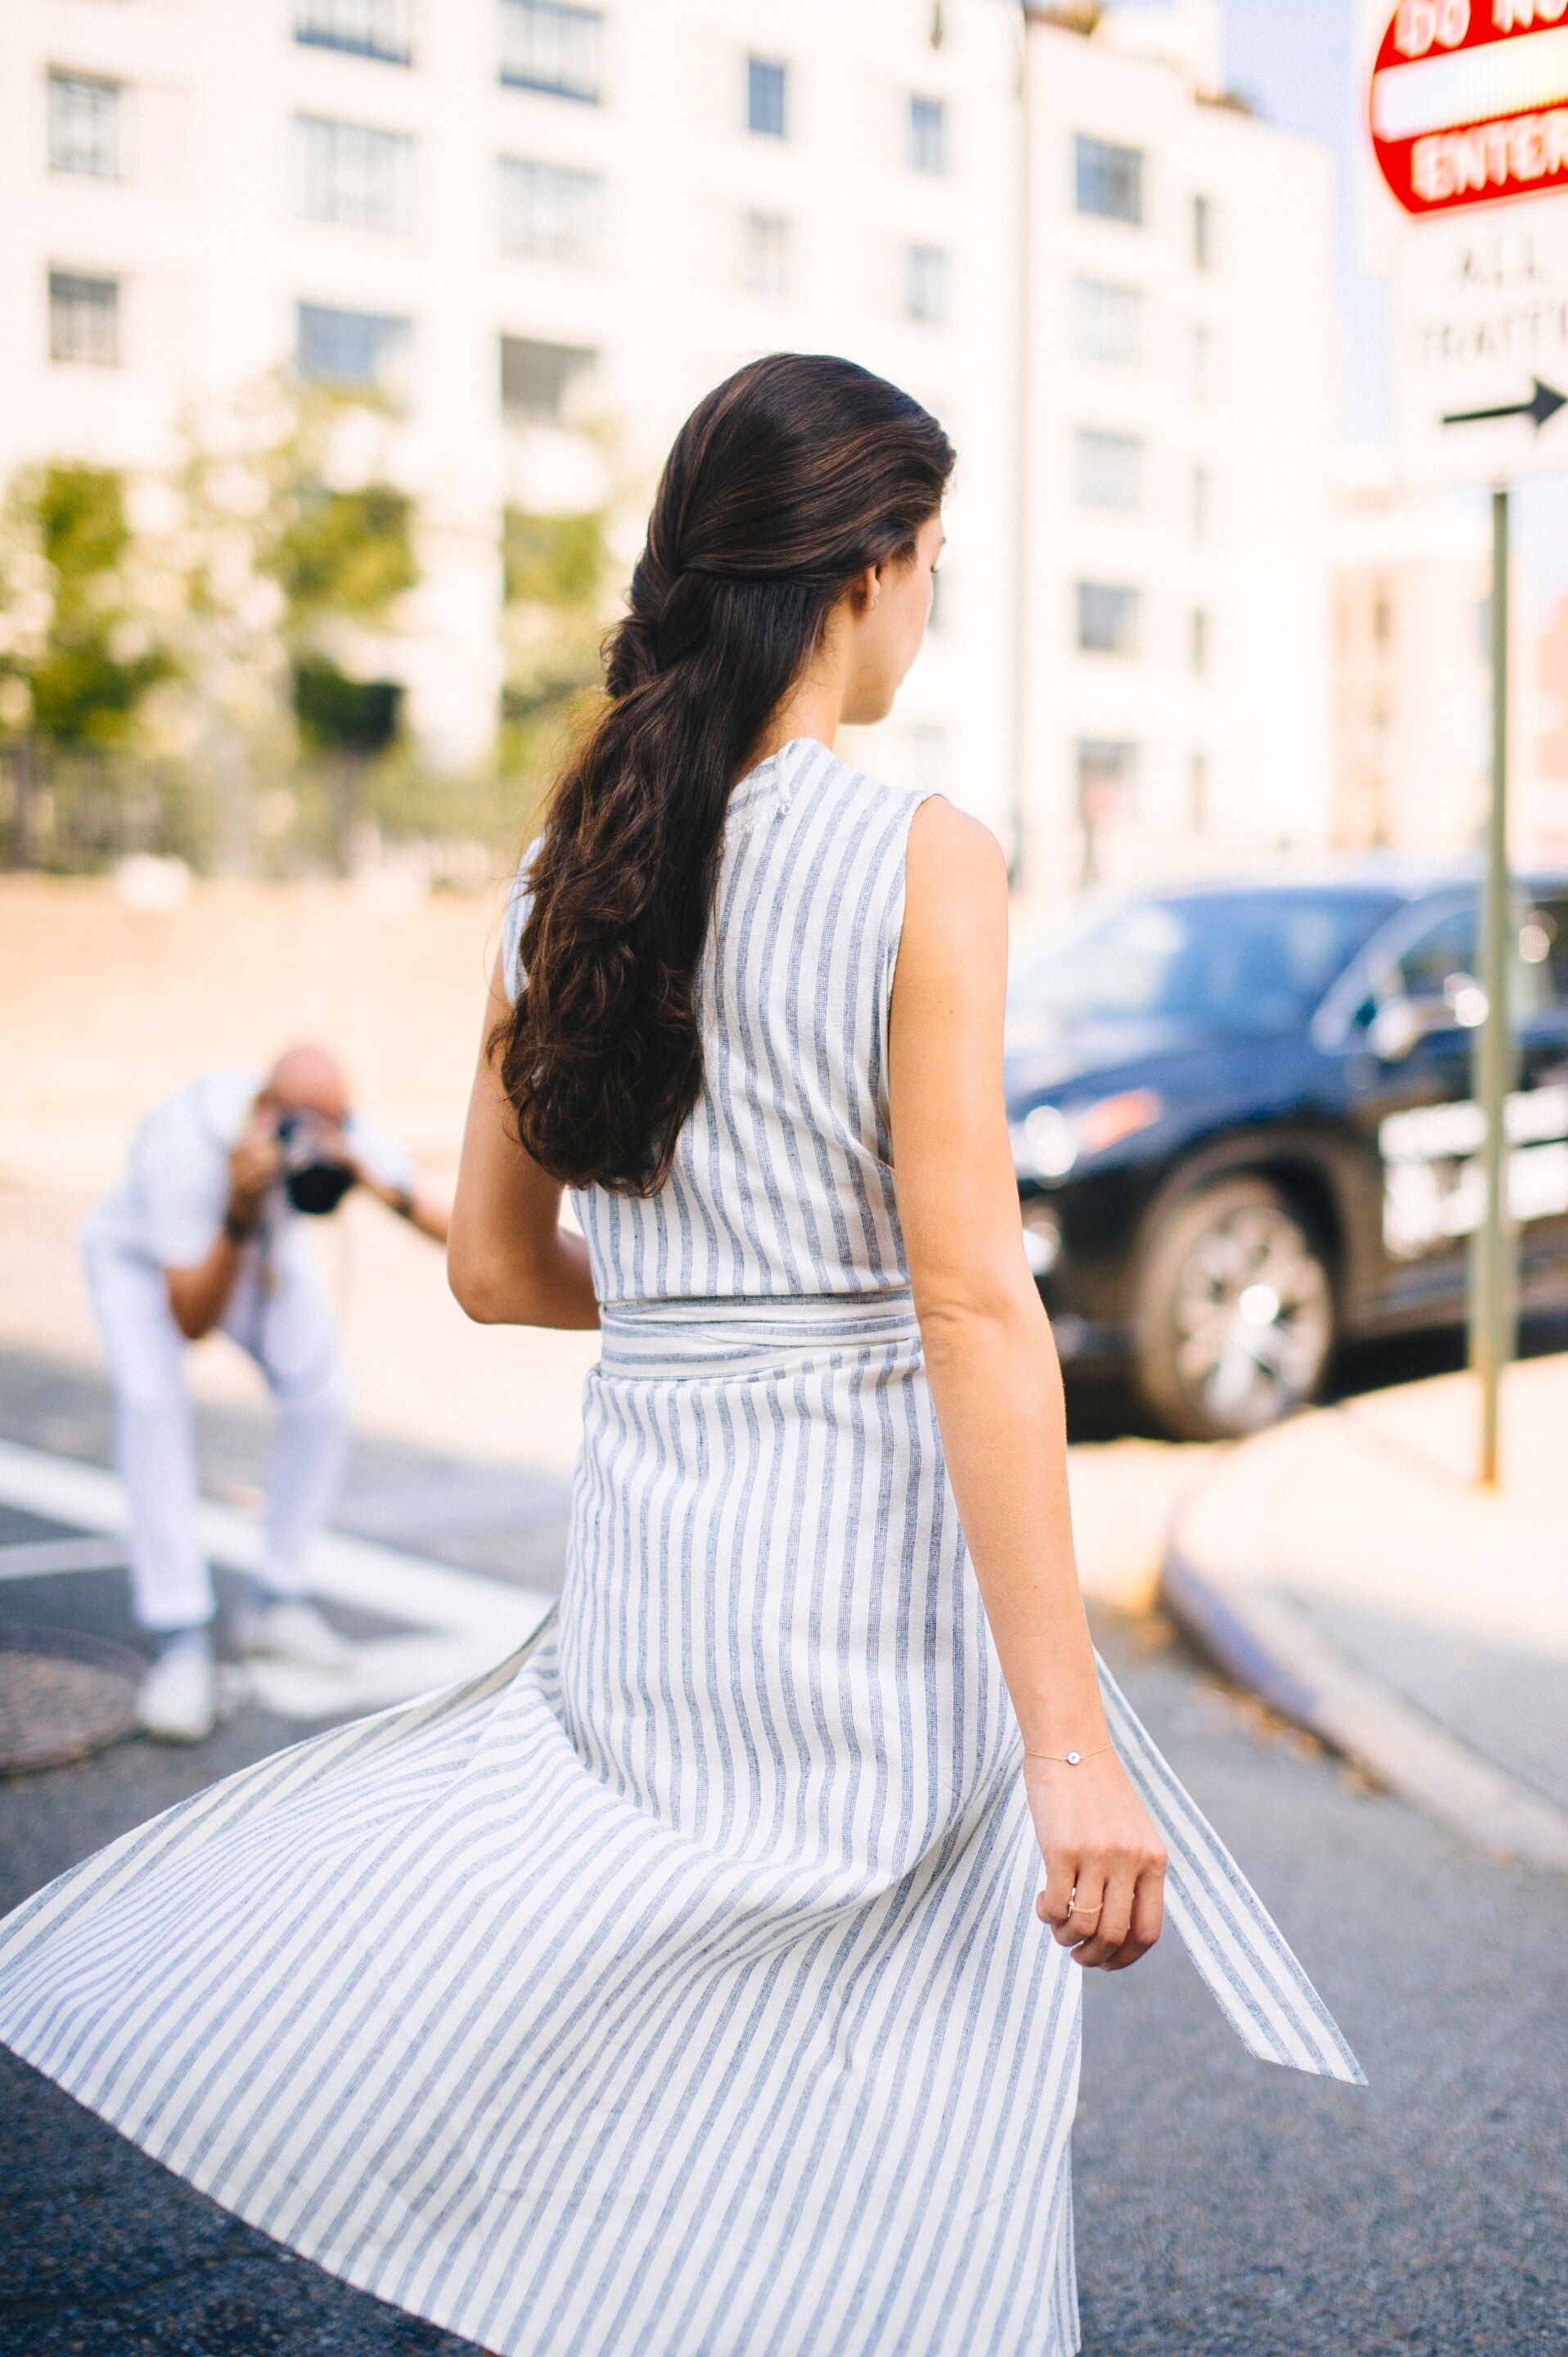 A woman walking down the street with her hair in a thick braid and a photographer taking her picture